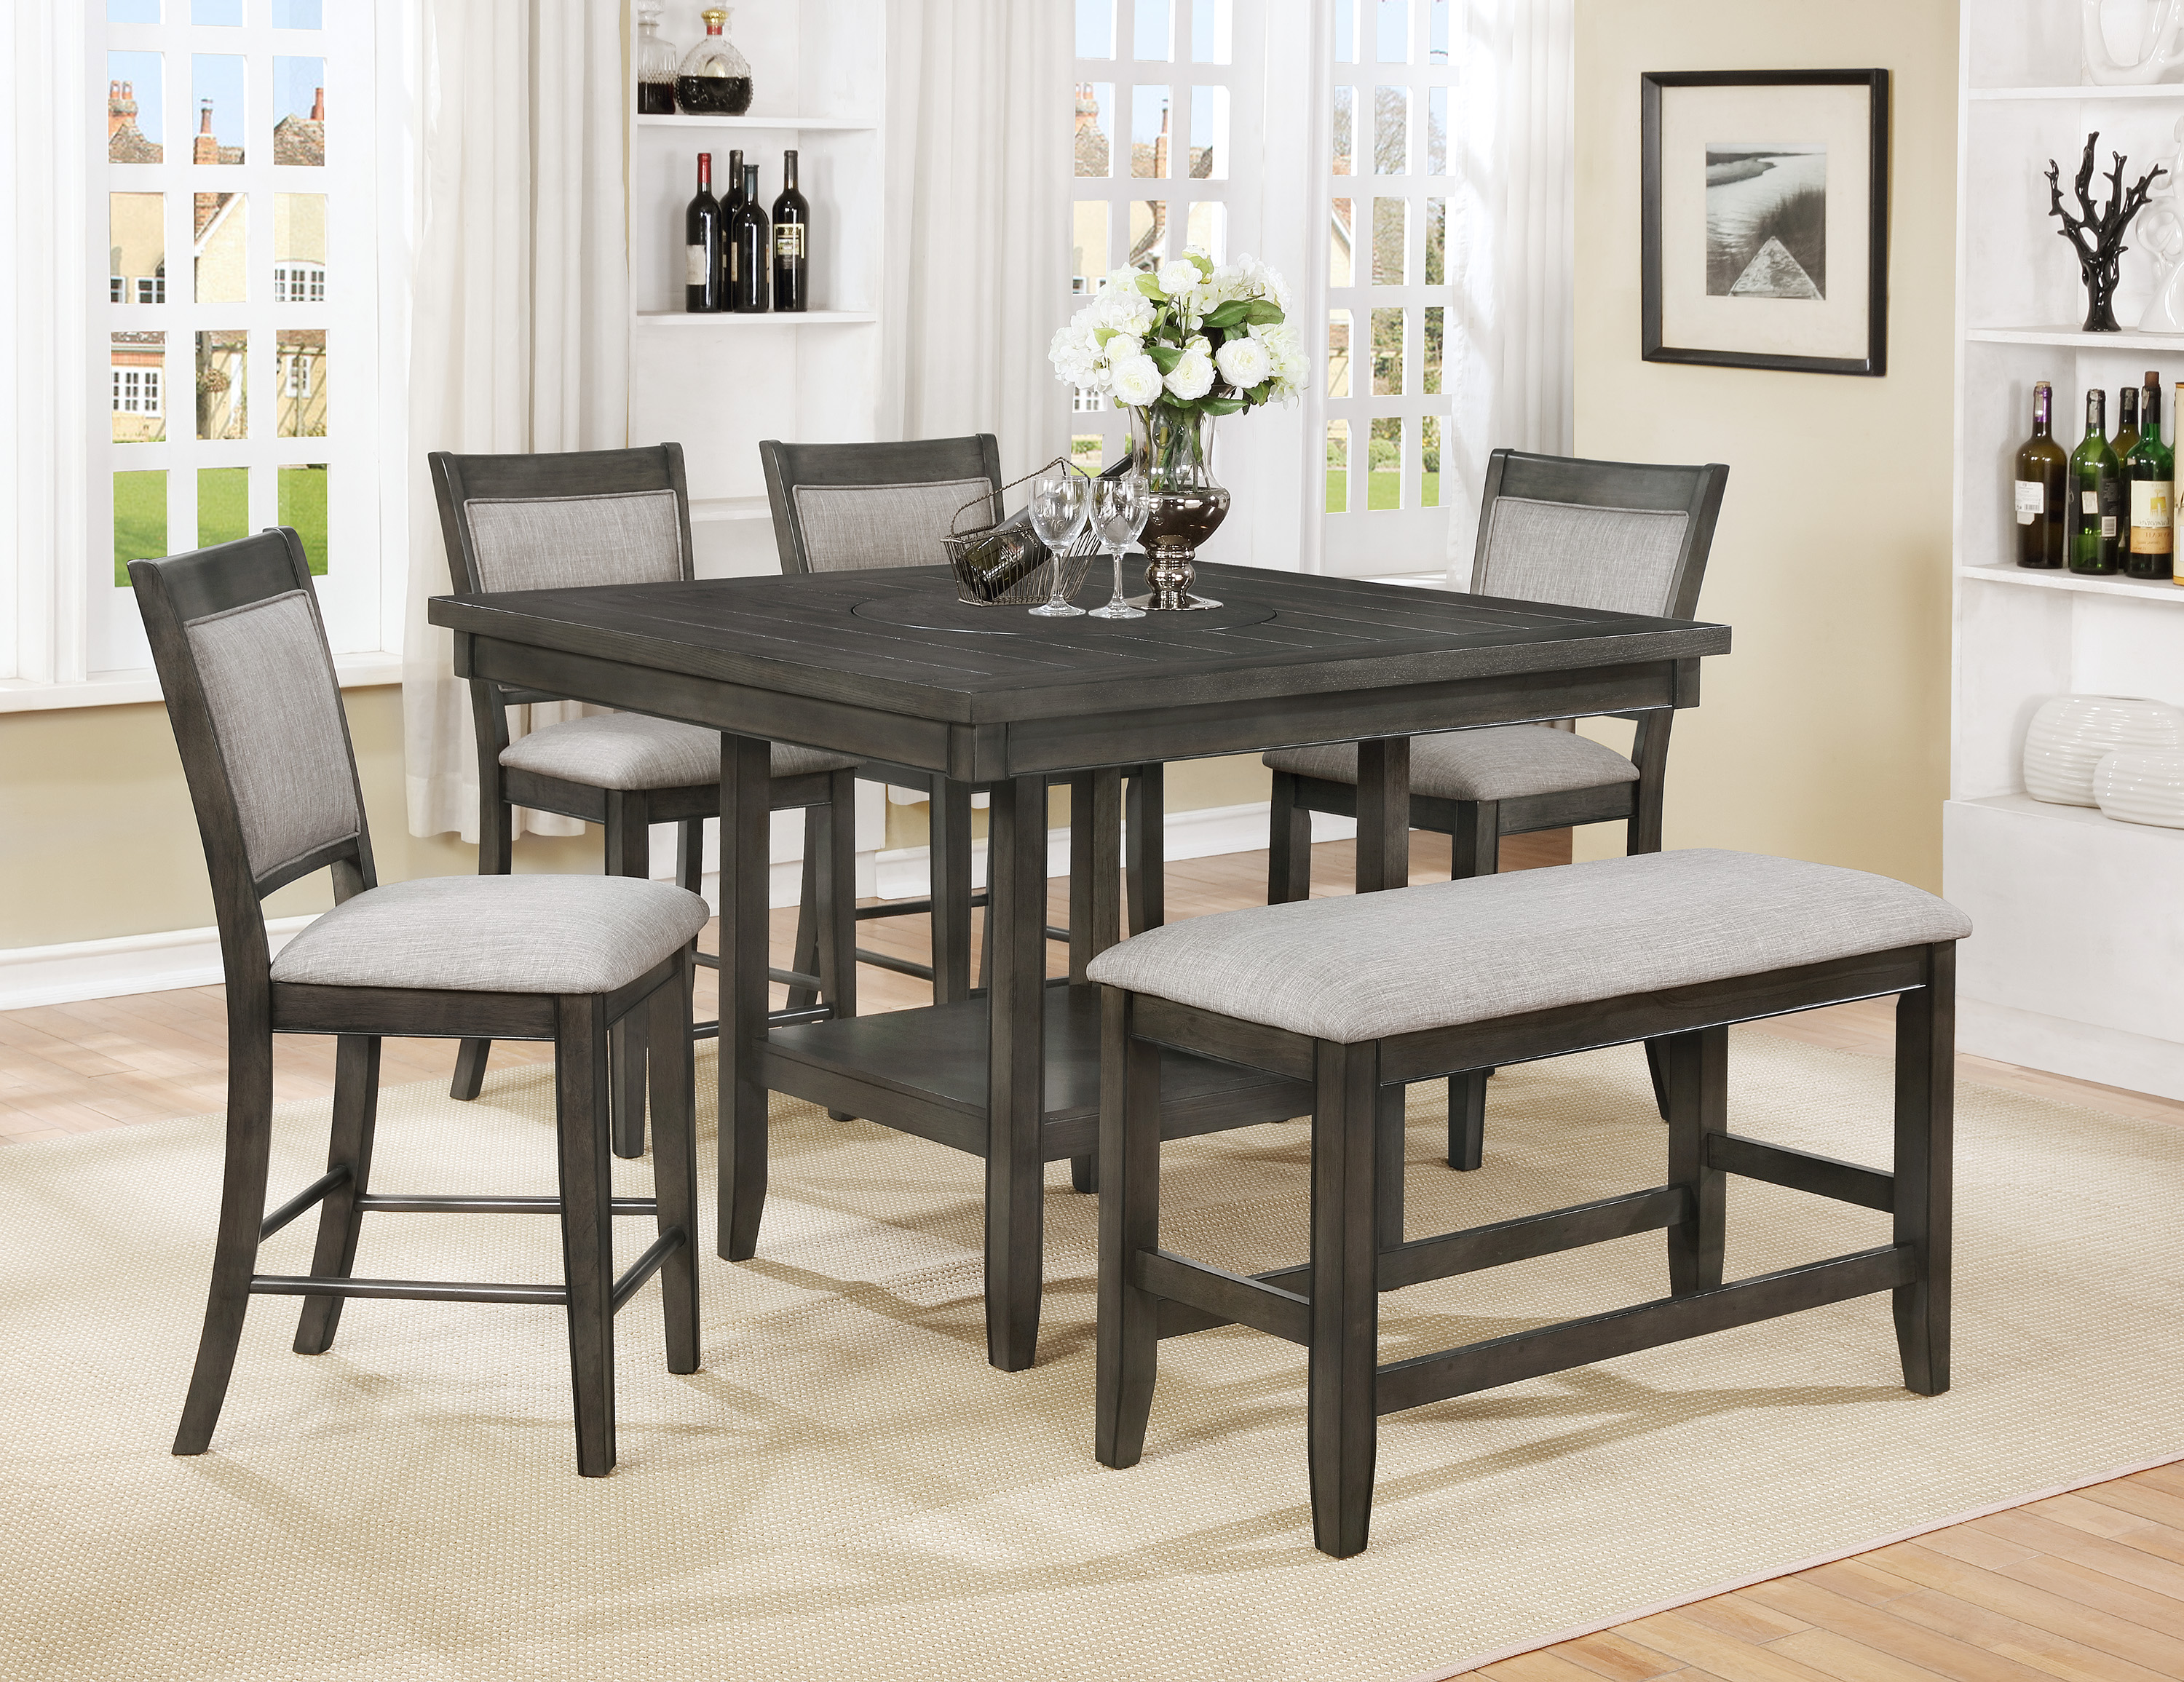 2727 FULTON COUNTER HT. GREY 6PC SET WITH BENCH